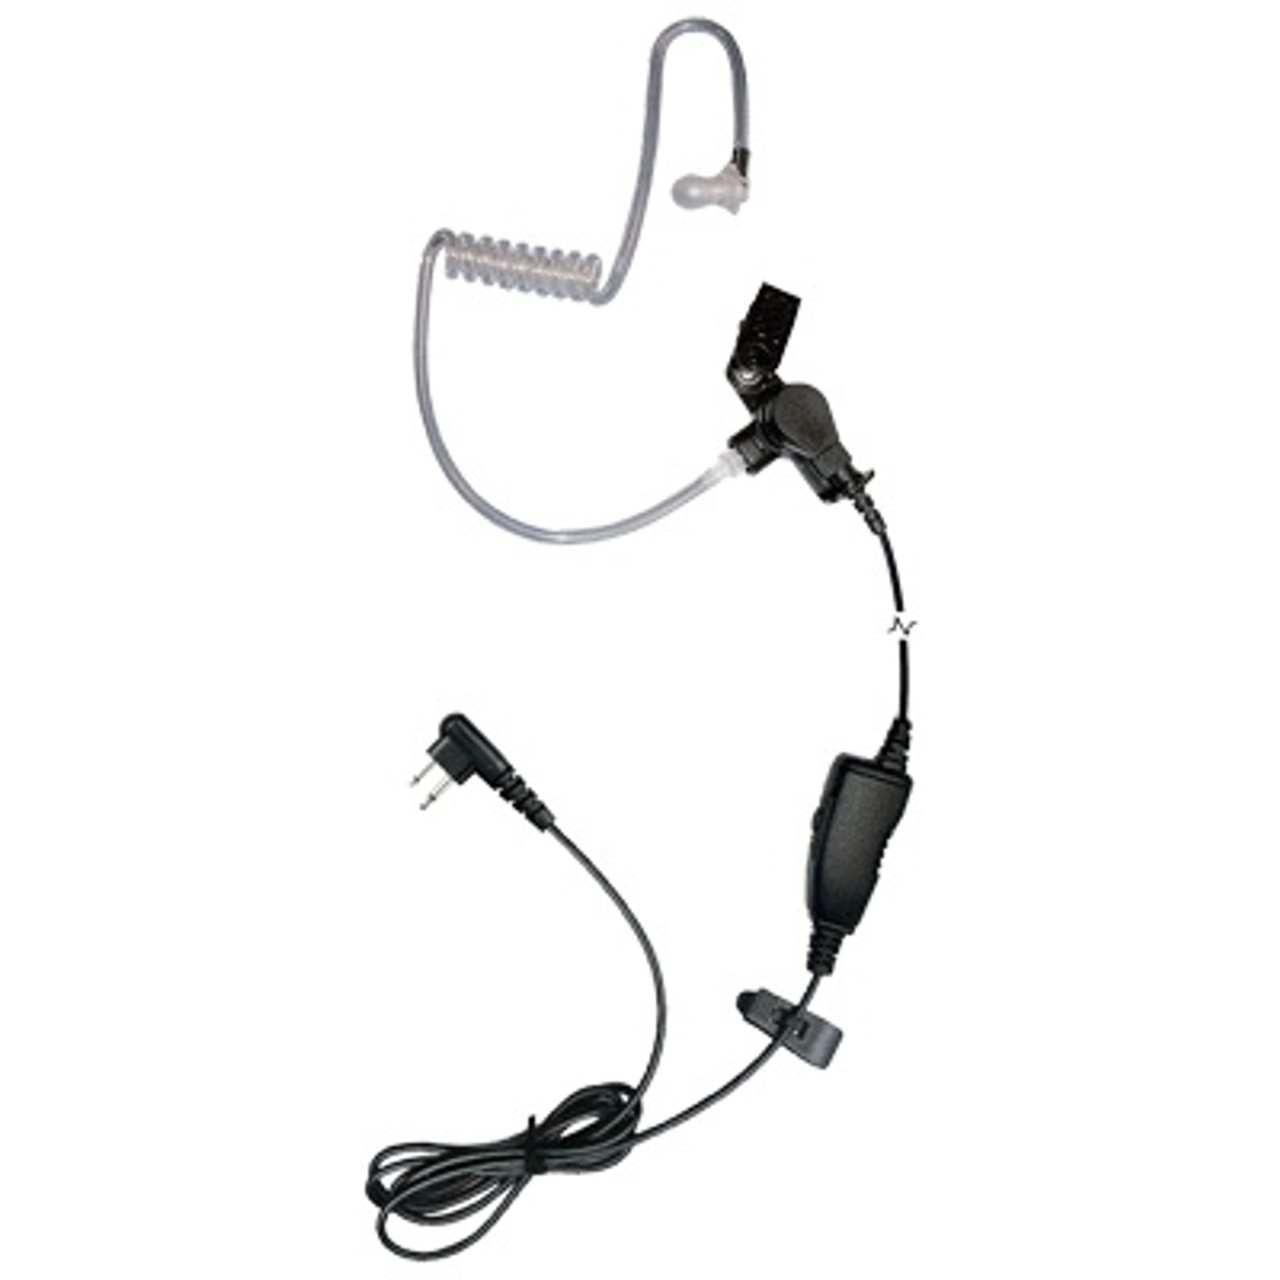 Higoodz In-Ear Headsets Air Tube Security Earpiece with Mic for